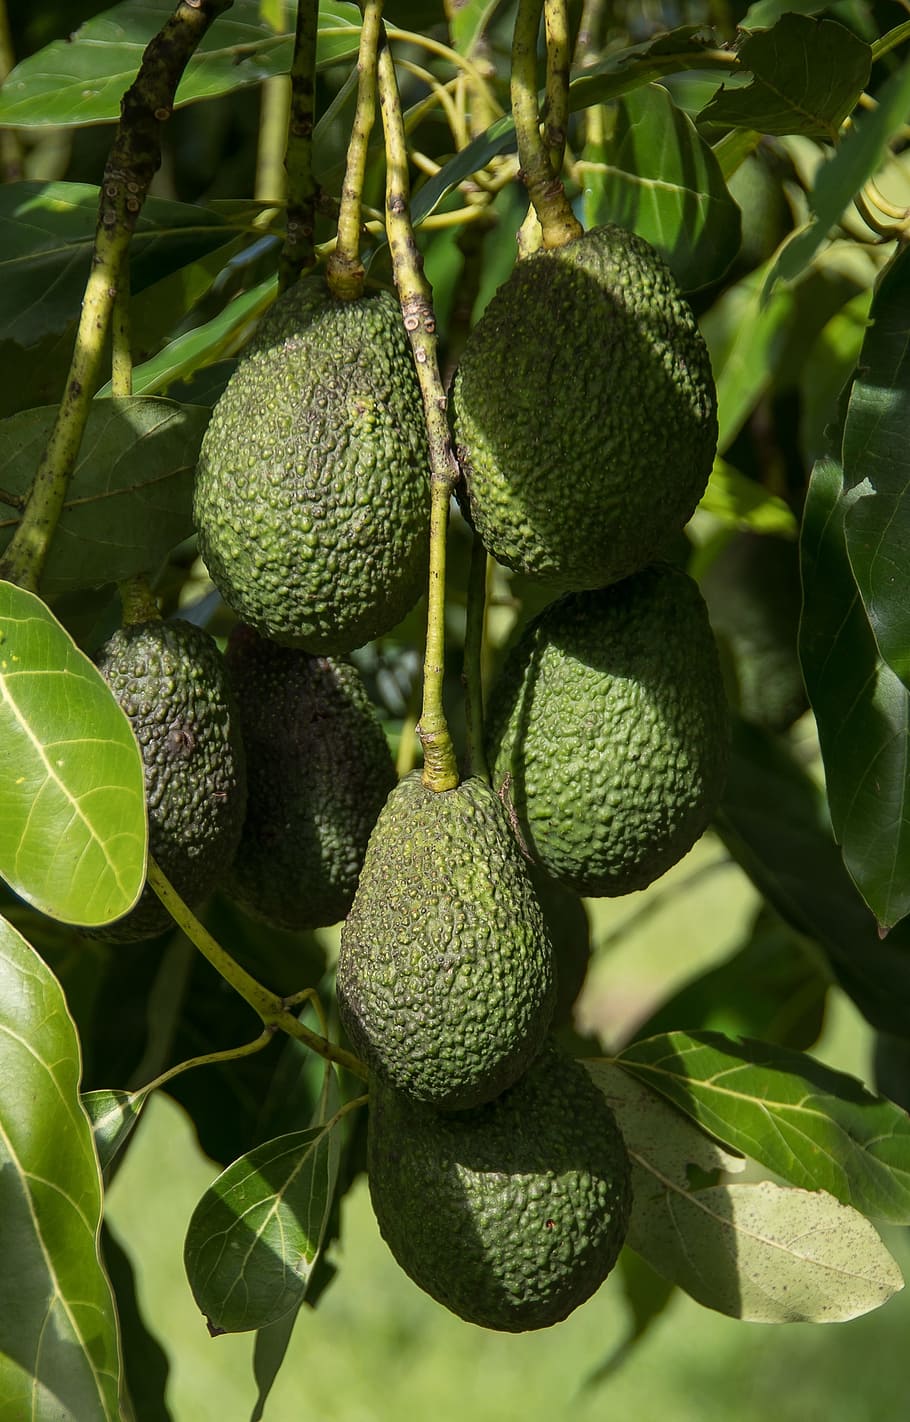 hass avocado, avocados, fruit, tree, green, growing, hanging, food, healthy eating, green color